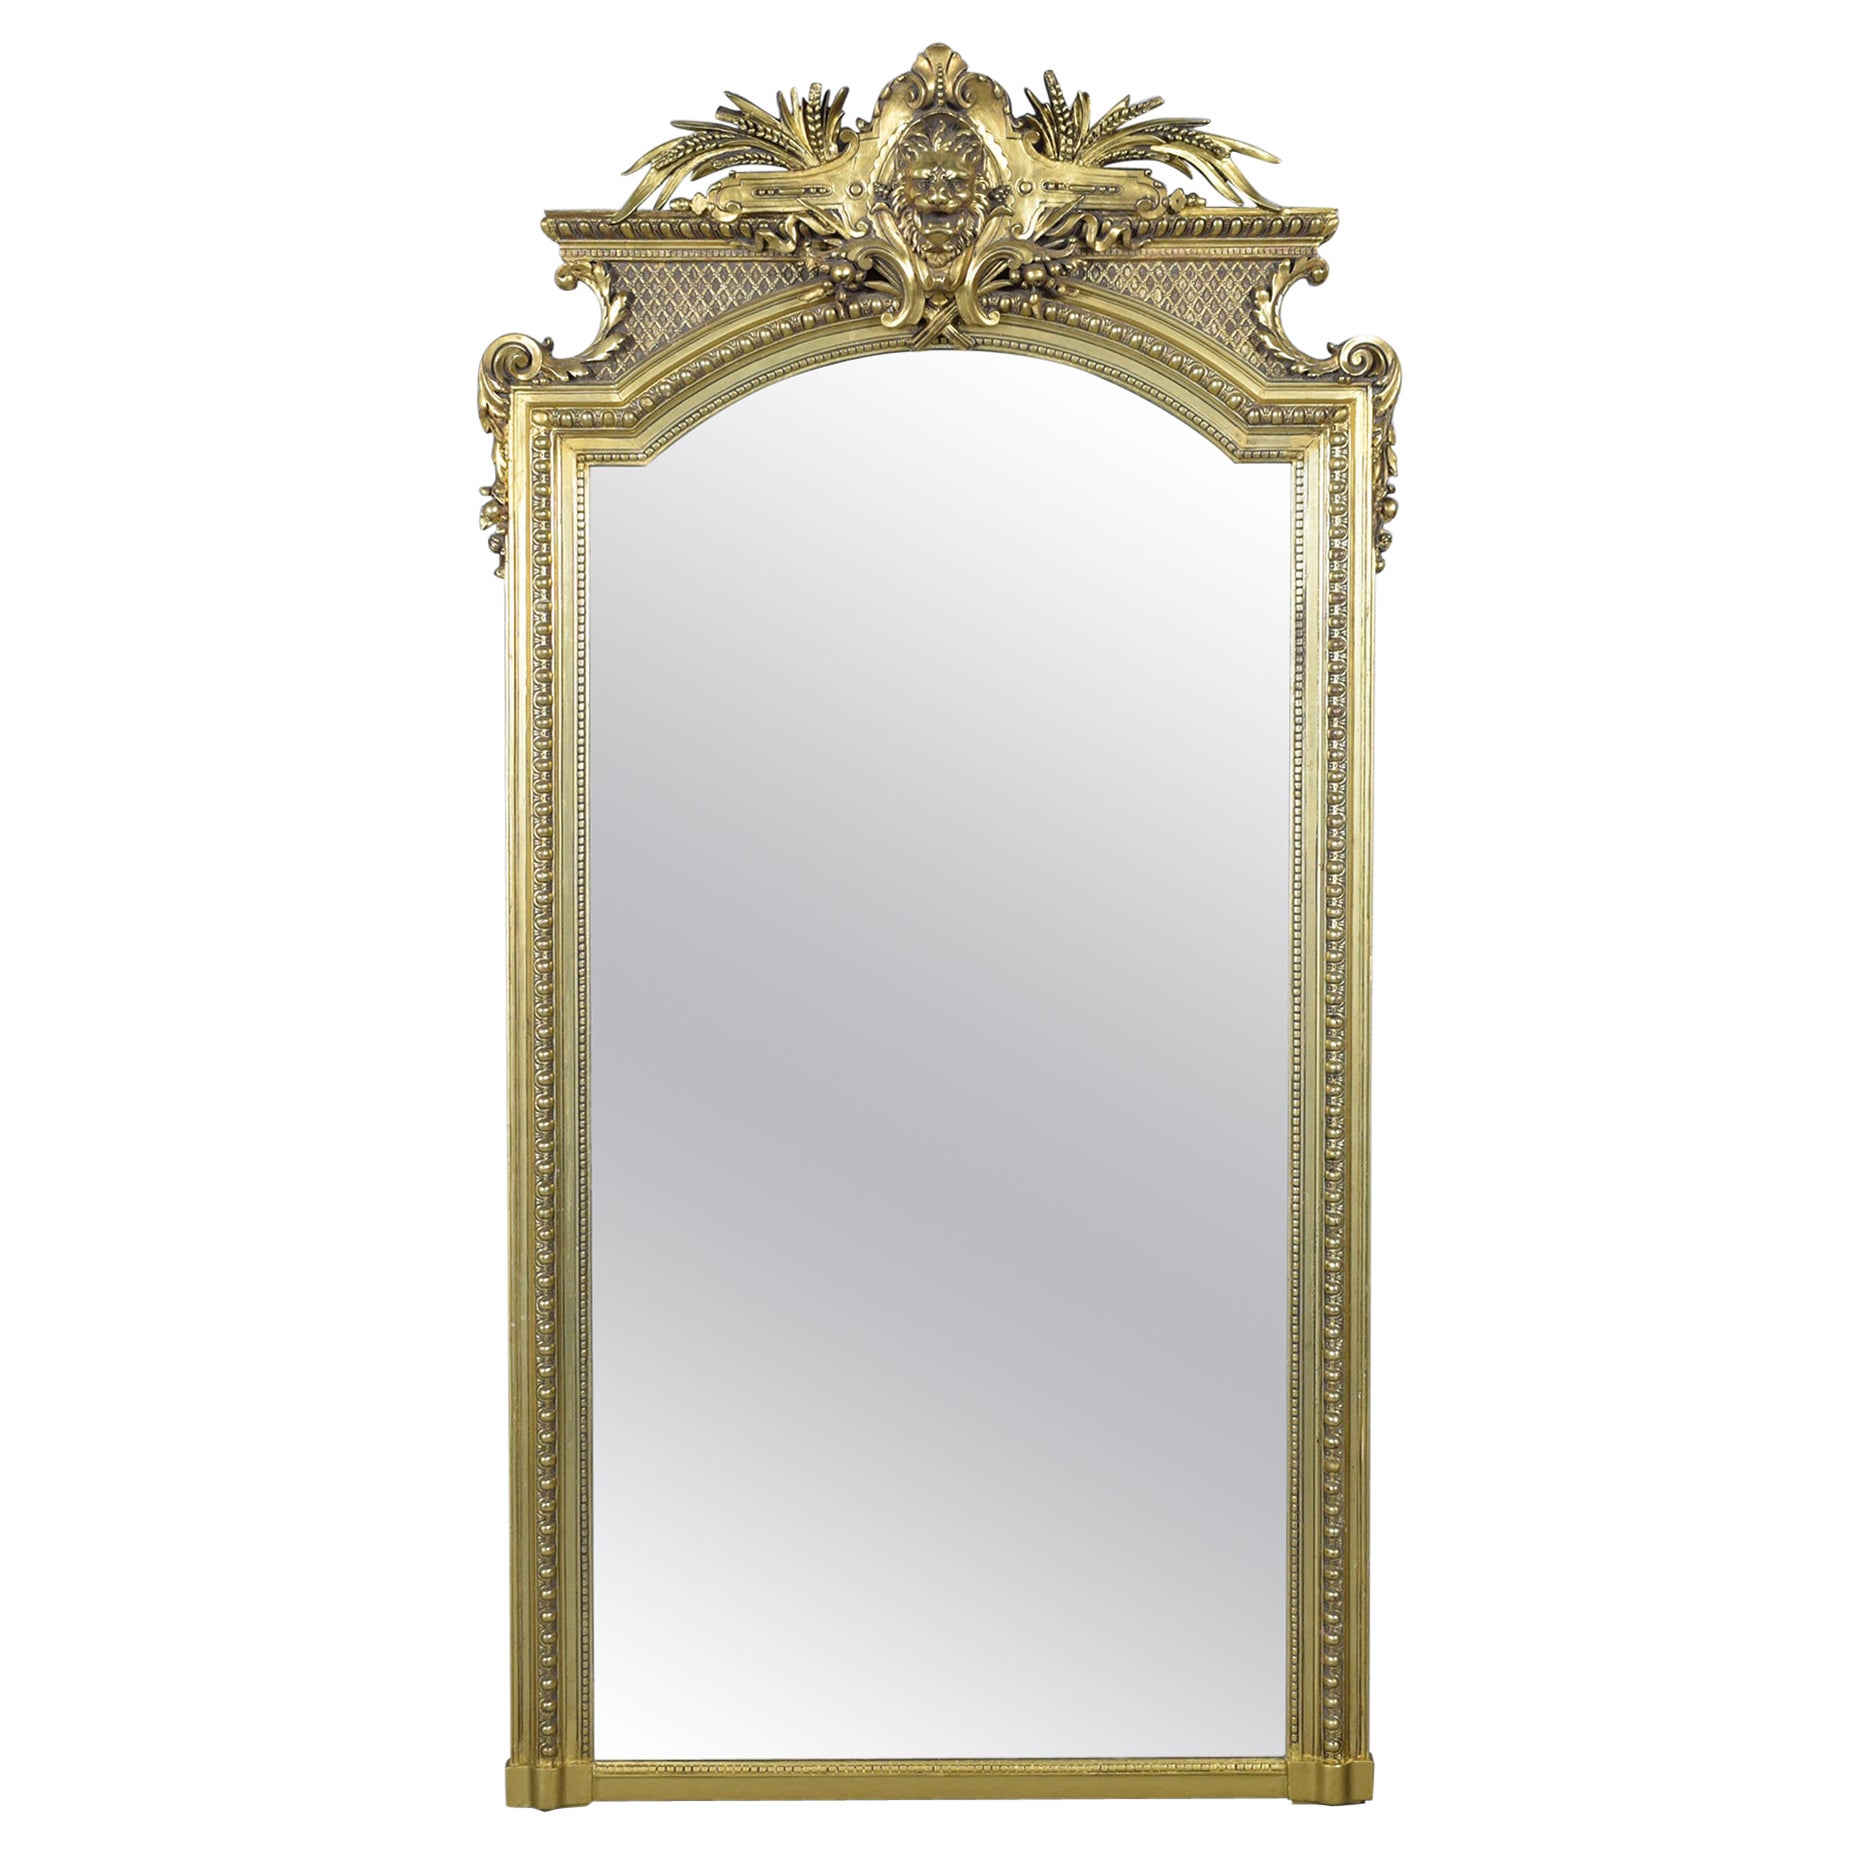 Late 19th-Century French Giltwood Standing Mirror: Restored Elegance